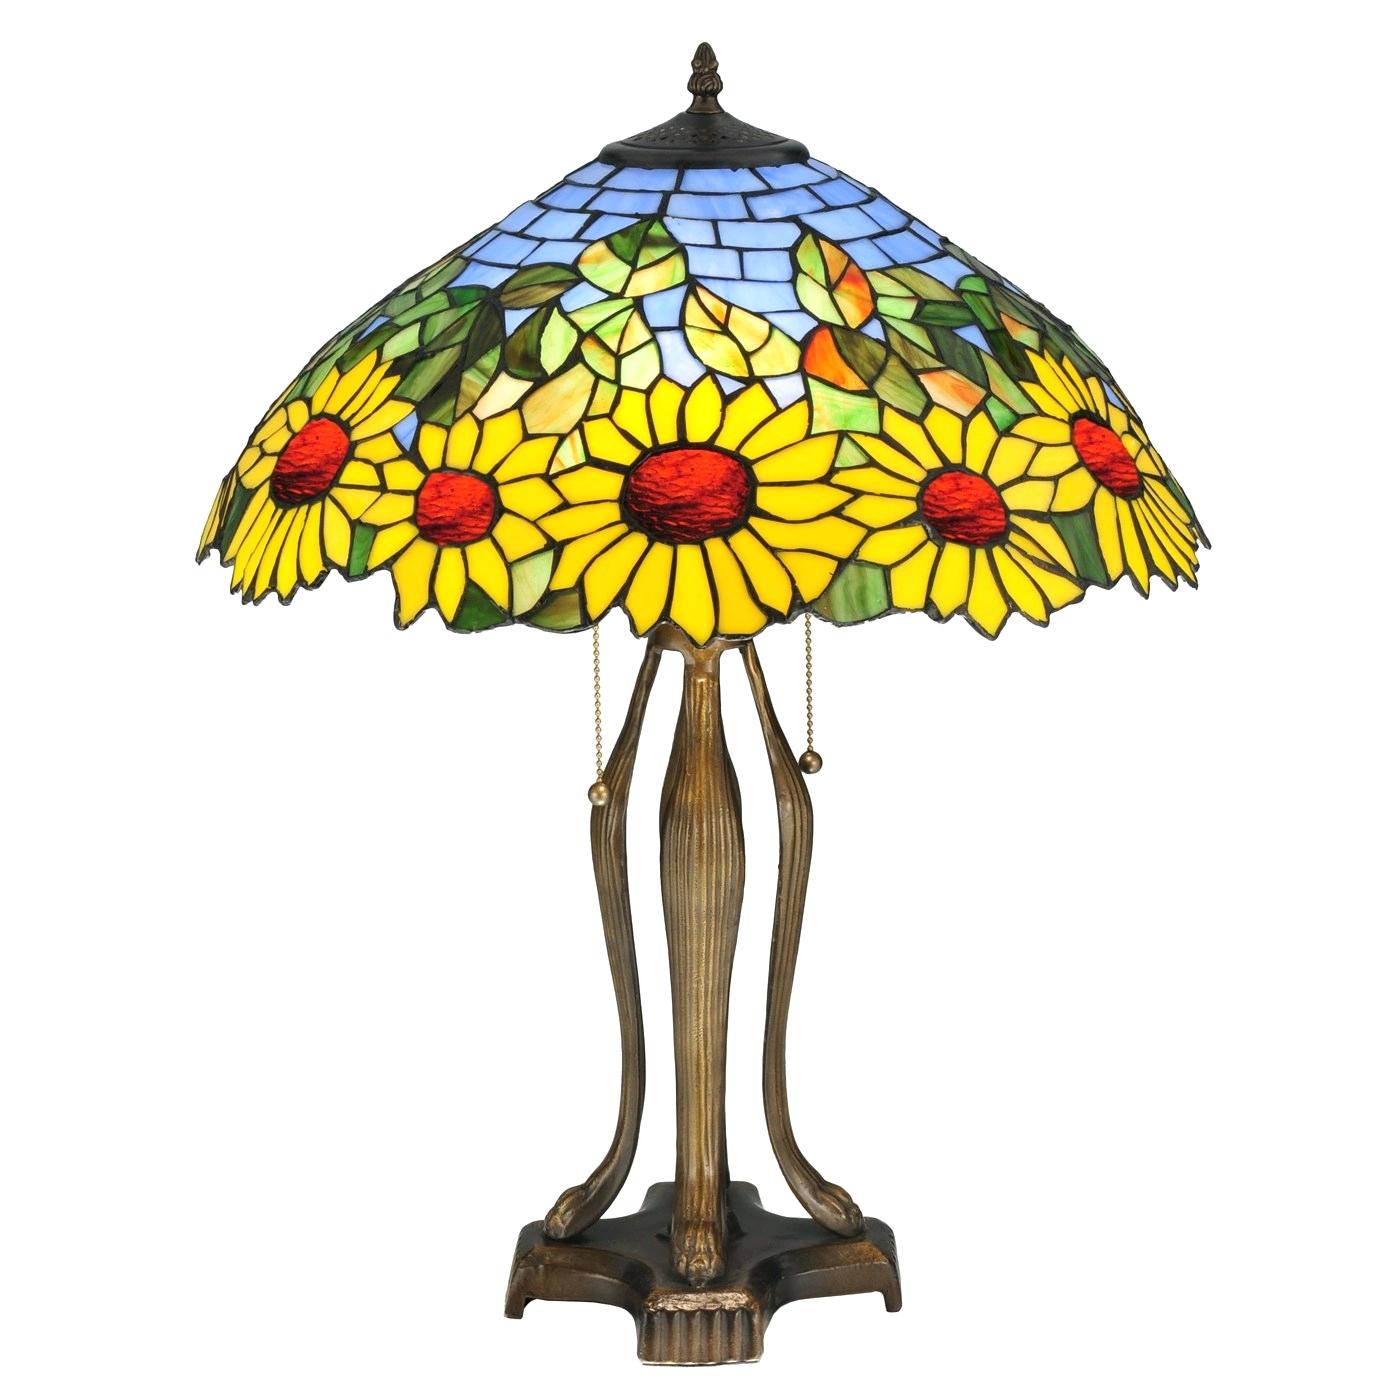 meyda tiffany lamps wild sunflower light table lamp shade replacement accent black iron end formal dining room chairs vintage marble coffee teal tray console with doors white